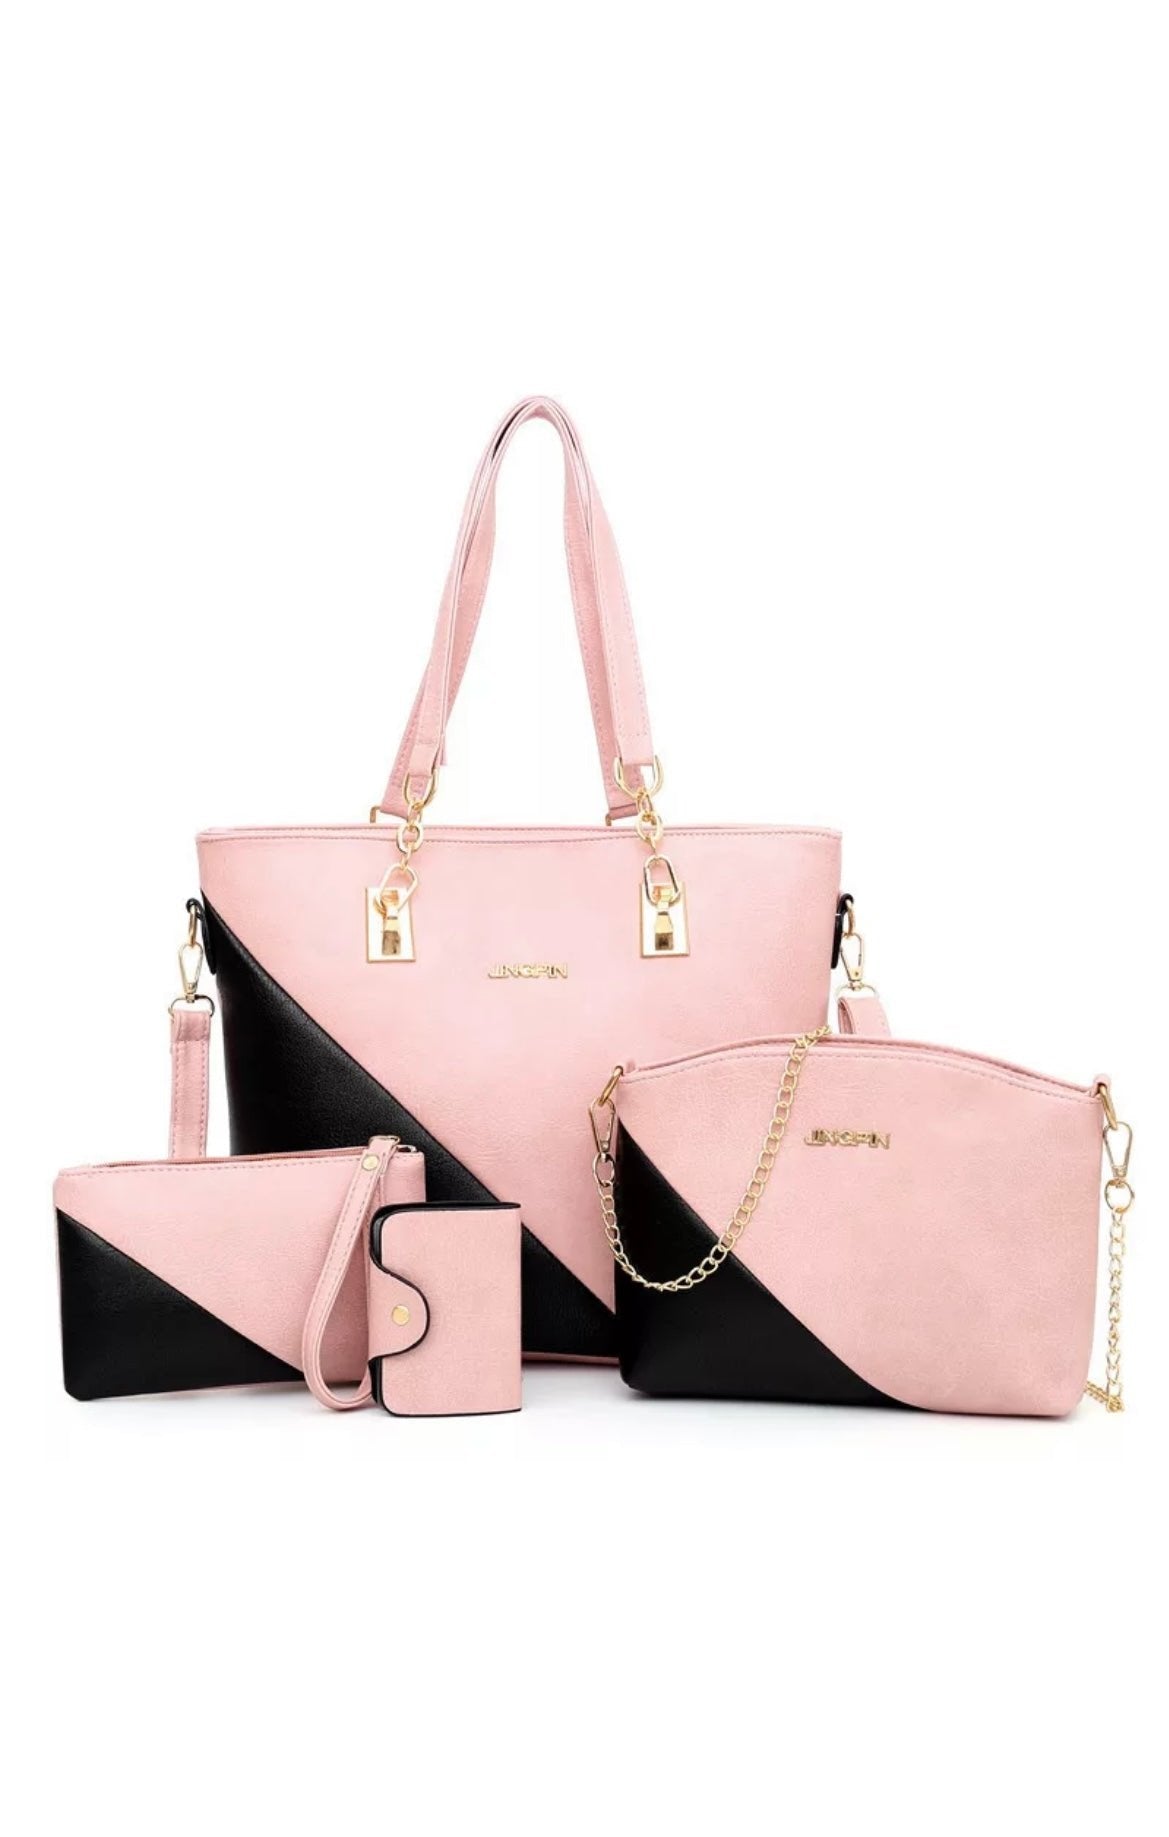 Shoulder Bag and Matching Wallet 4 Piece/Set (Many Colors)